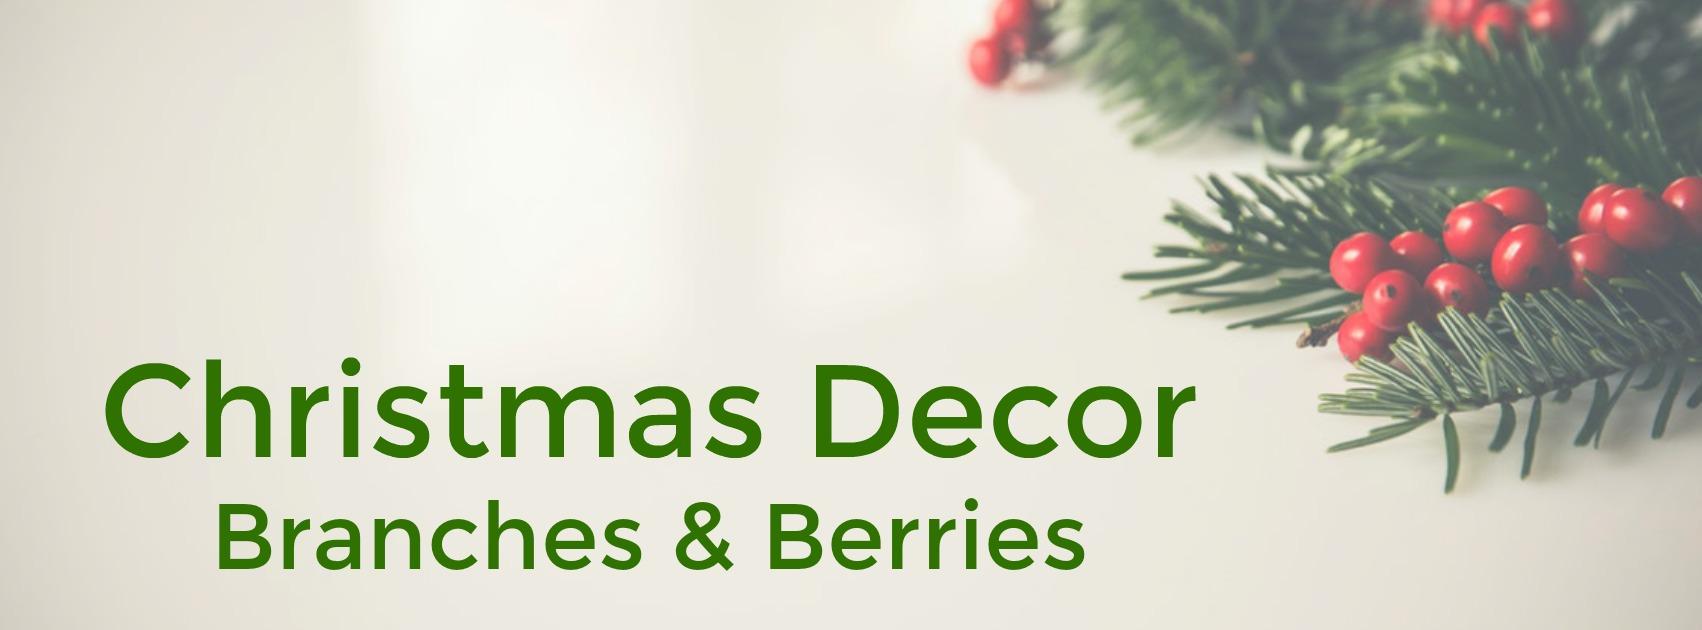 Branches & Berries – Liven Up Your Christmas Decor